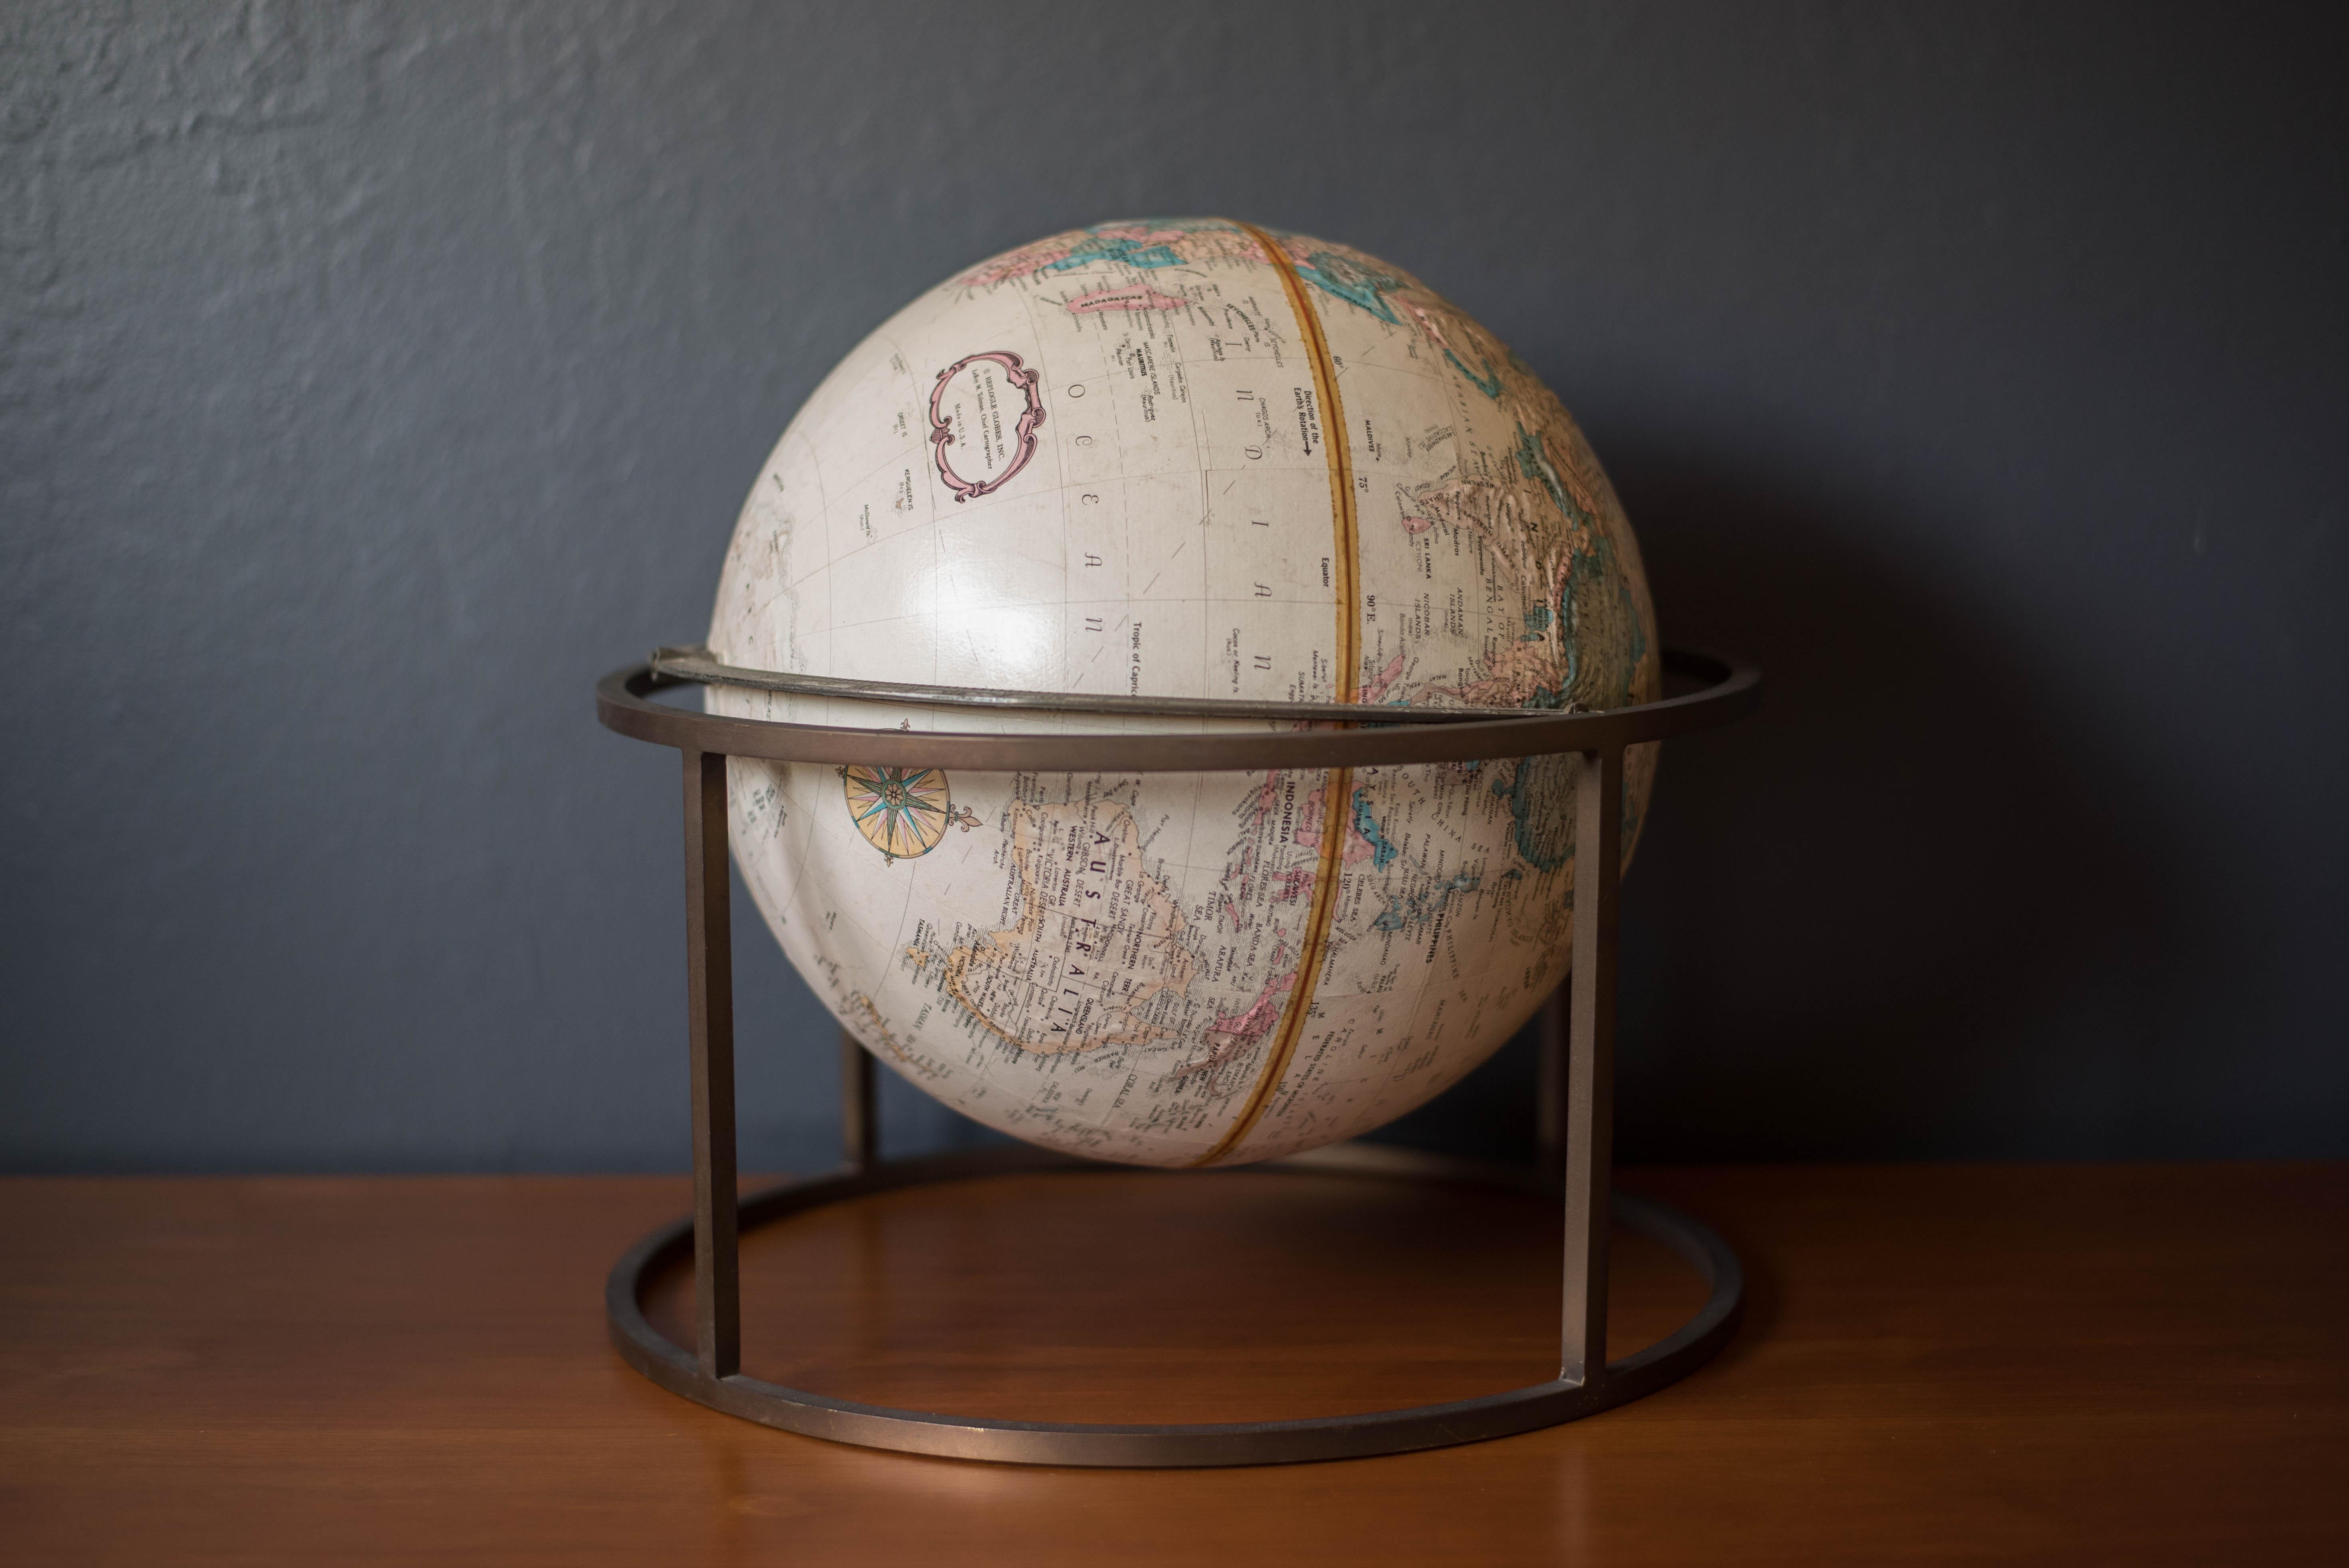 Vintage desk or tabletop Repogle globe with stand in brass. This piece rotates on a full swing meridian and displays plenty of vintage charm. The perfect accessory piece for any home office or library room.